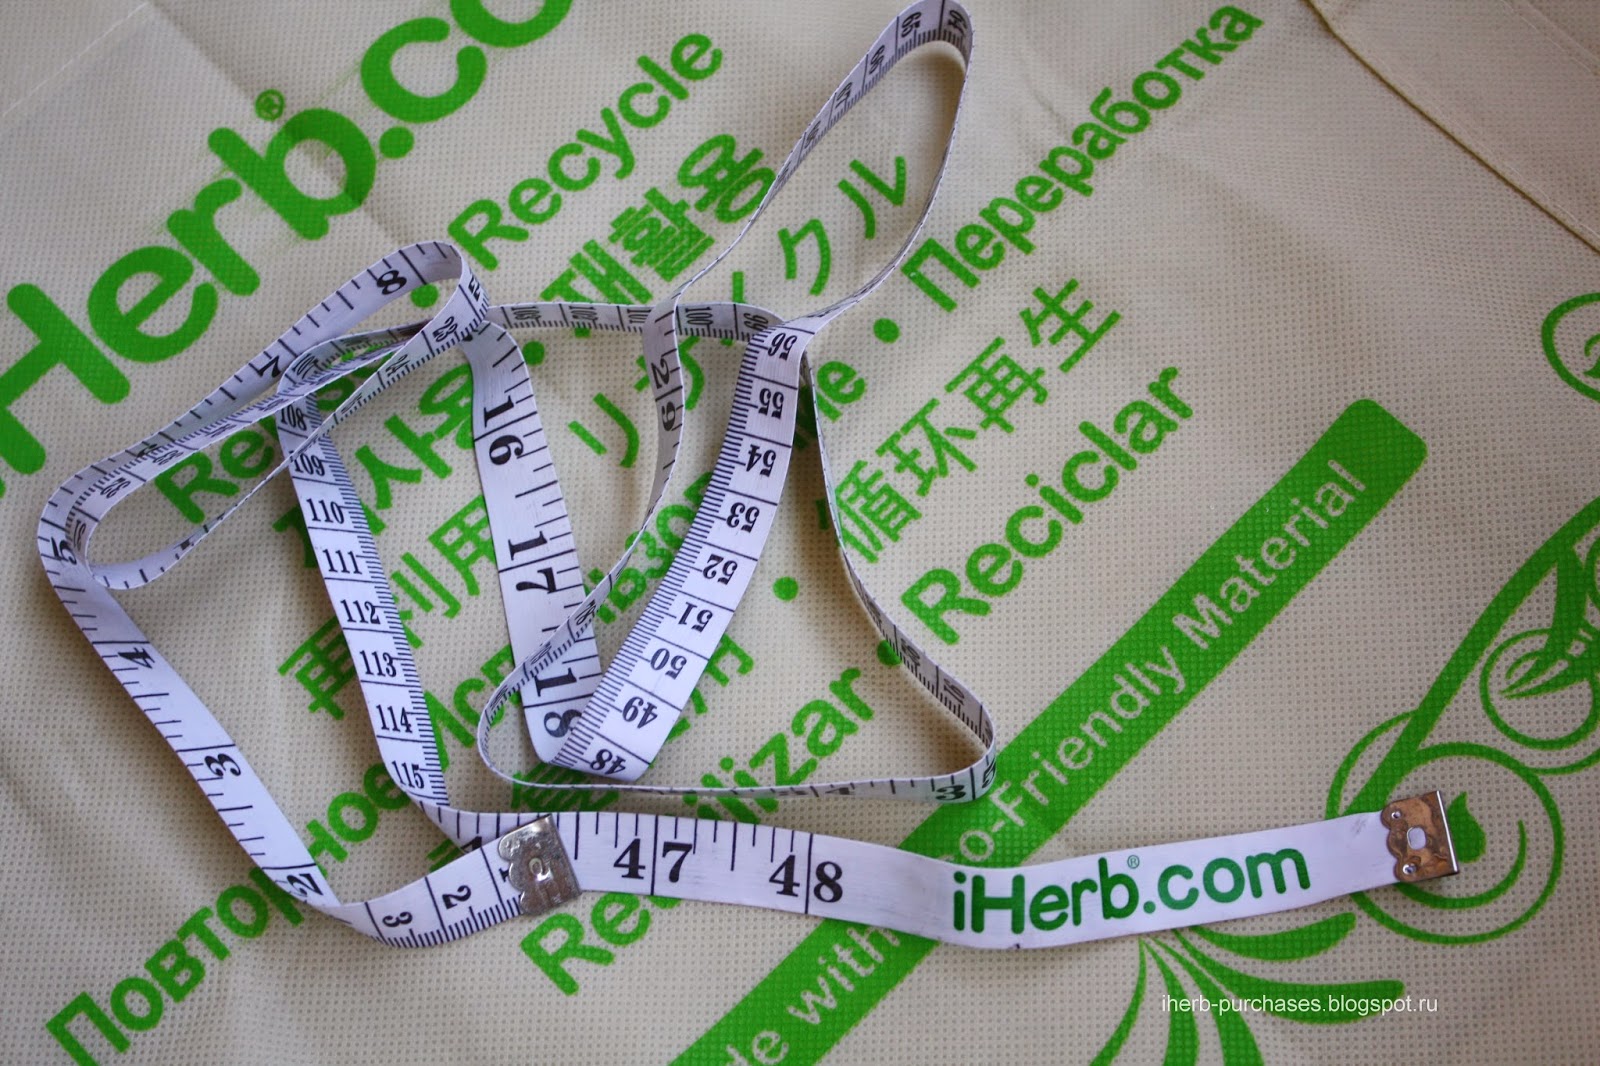 iHerb Promotional Materials, Eco-Friendly Grocery Tote Bag, 1 Bag